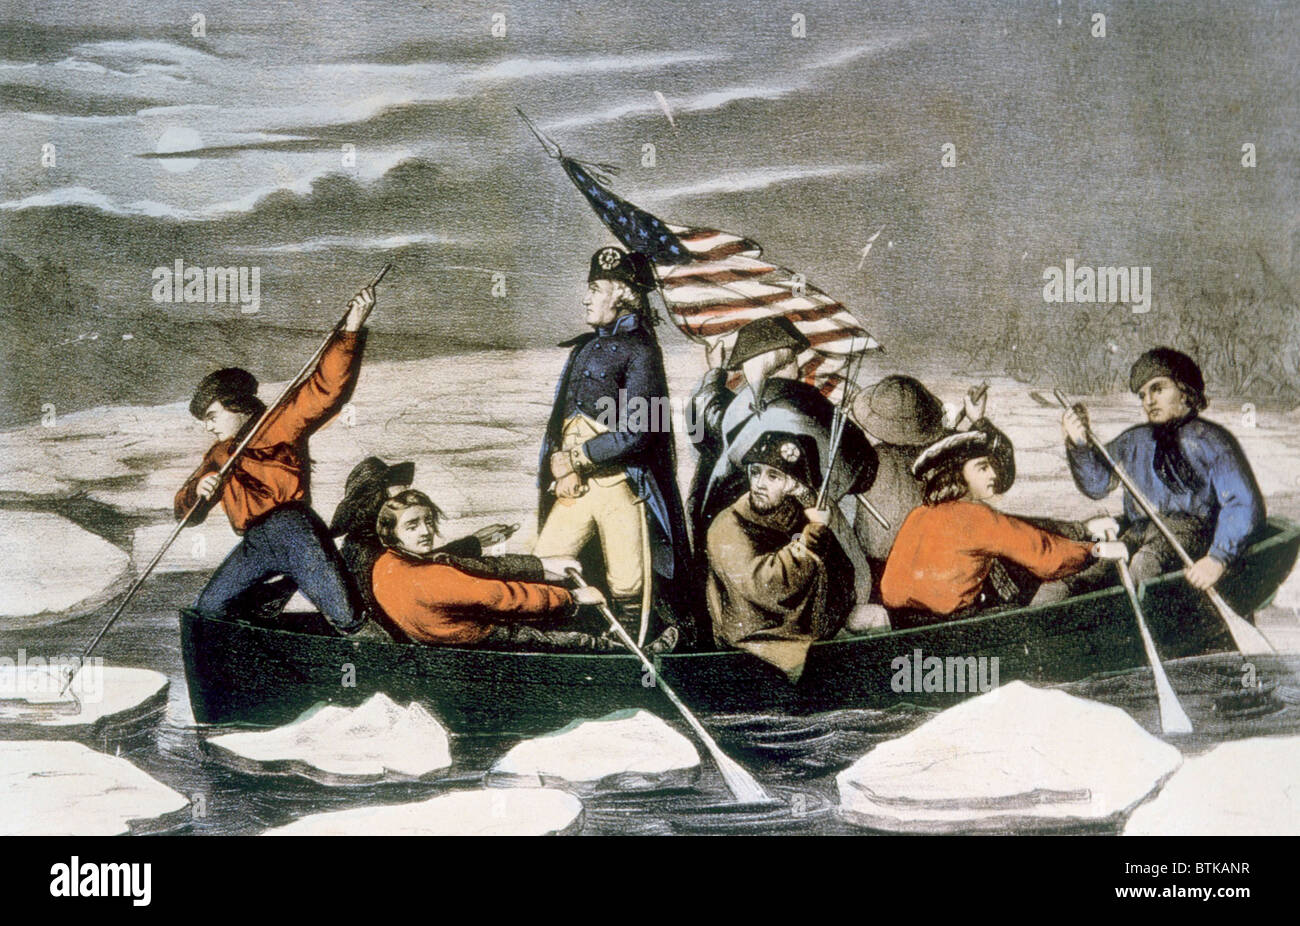 General George Washington crossing the Delaware River on the eve of the Battle of Trenton, December 25, 1776, lithograph by Currier & Ives Stock Photo